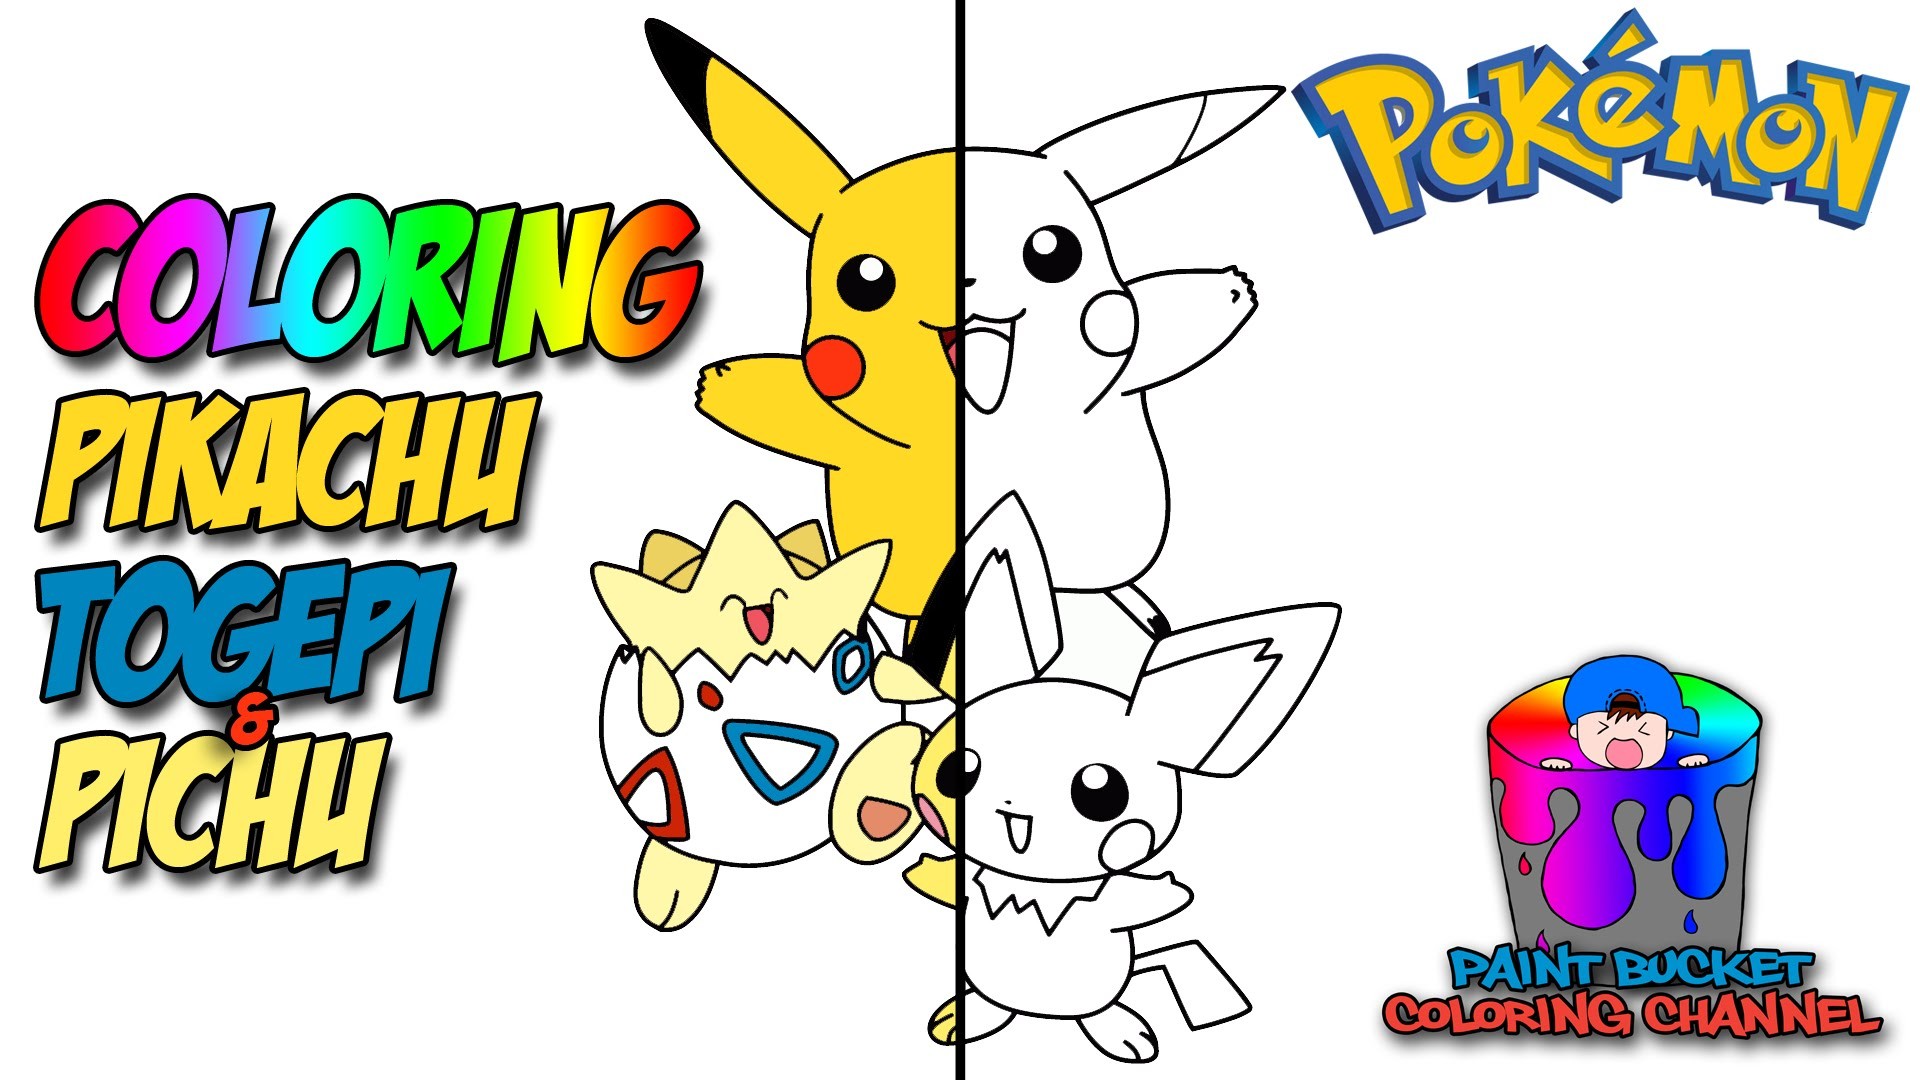 1920x1080 Coloring Pikachu Togepi Pichu - Pokemon Coloring Page for kids to learn  colors - YouTube